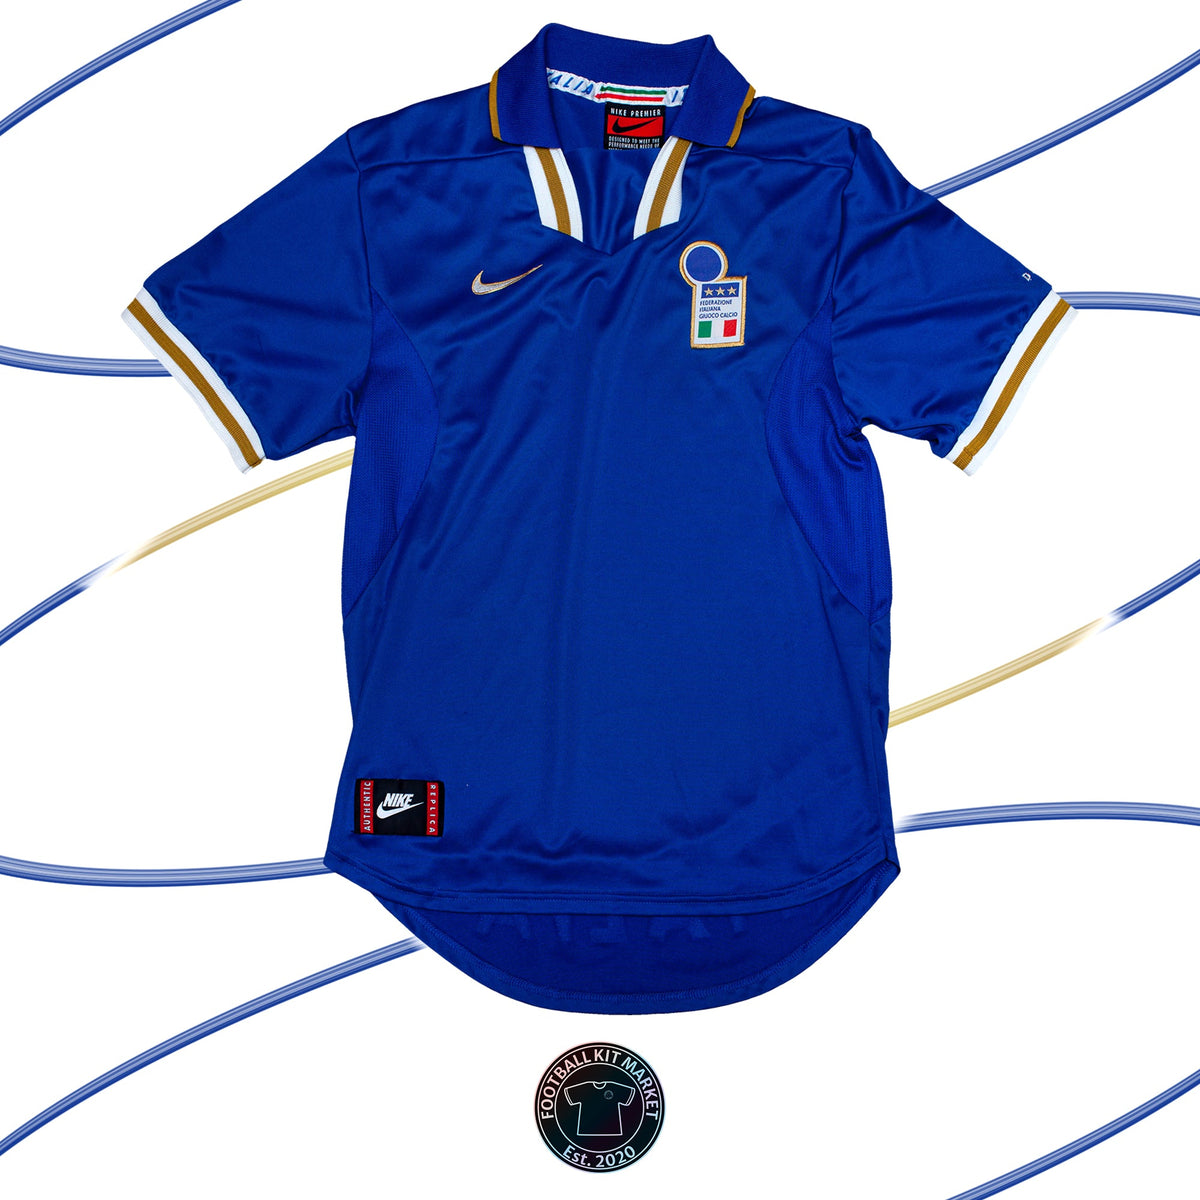 Genuine ITALY Home Shirt (1996-1997) - NIKE (S) - Product Image from Football Kit Market